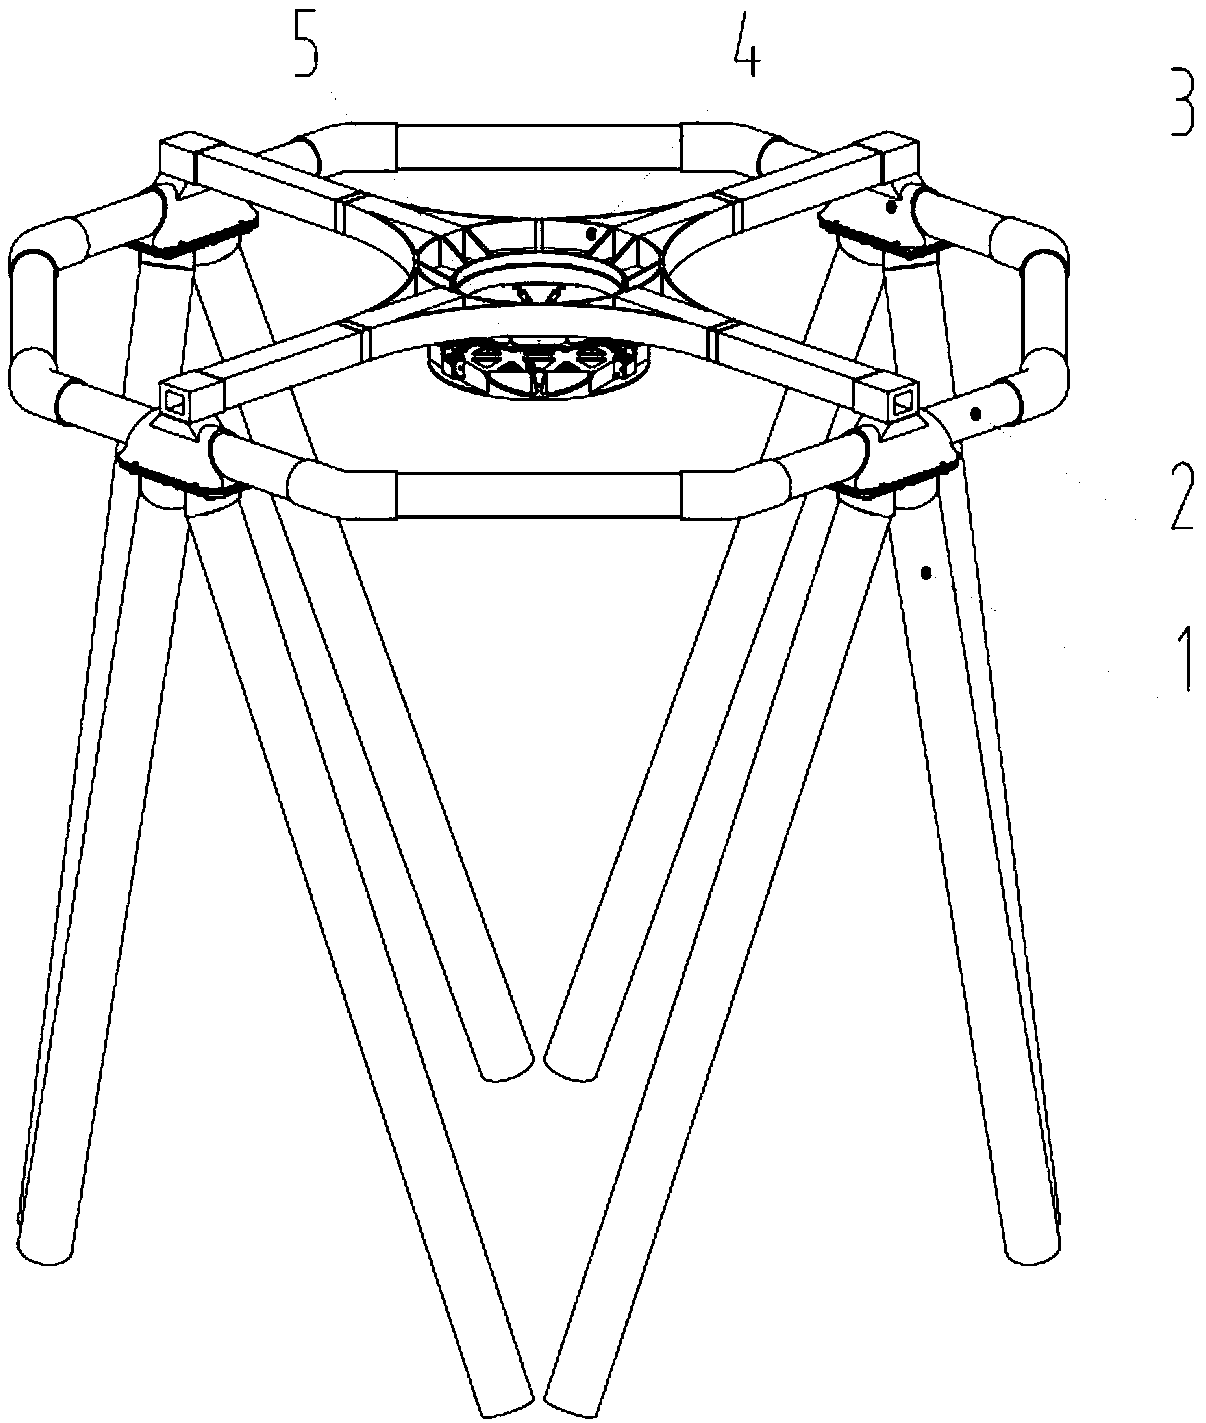 Carbon fiber support truss for secondary lens component of large-aperture telescope